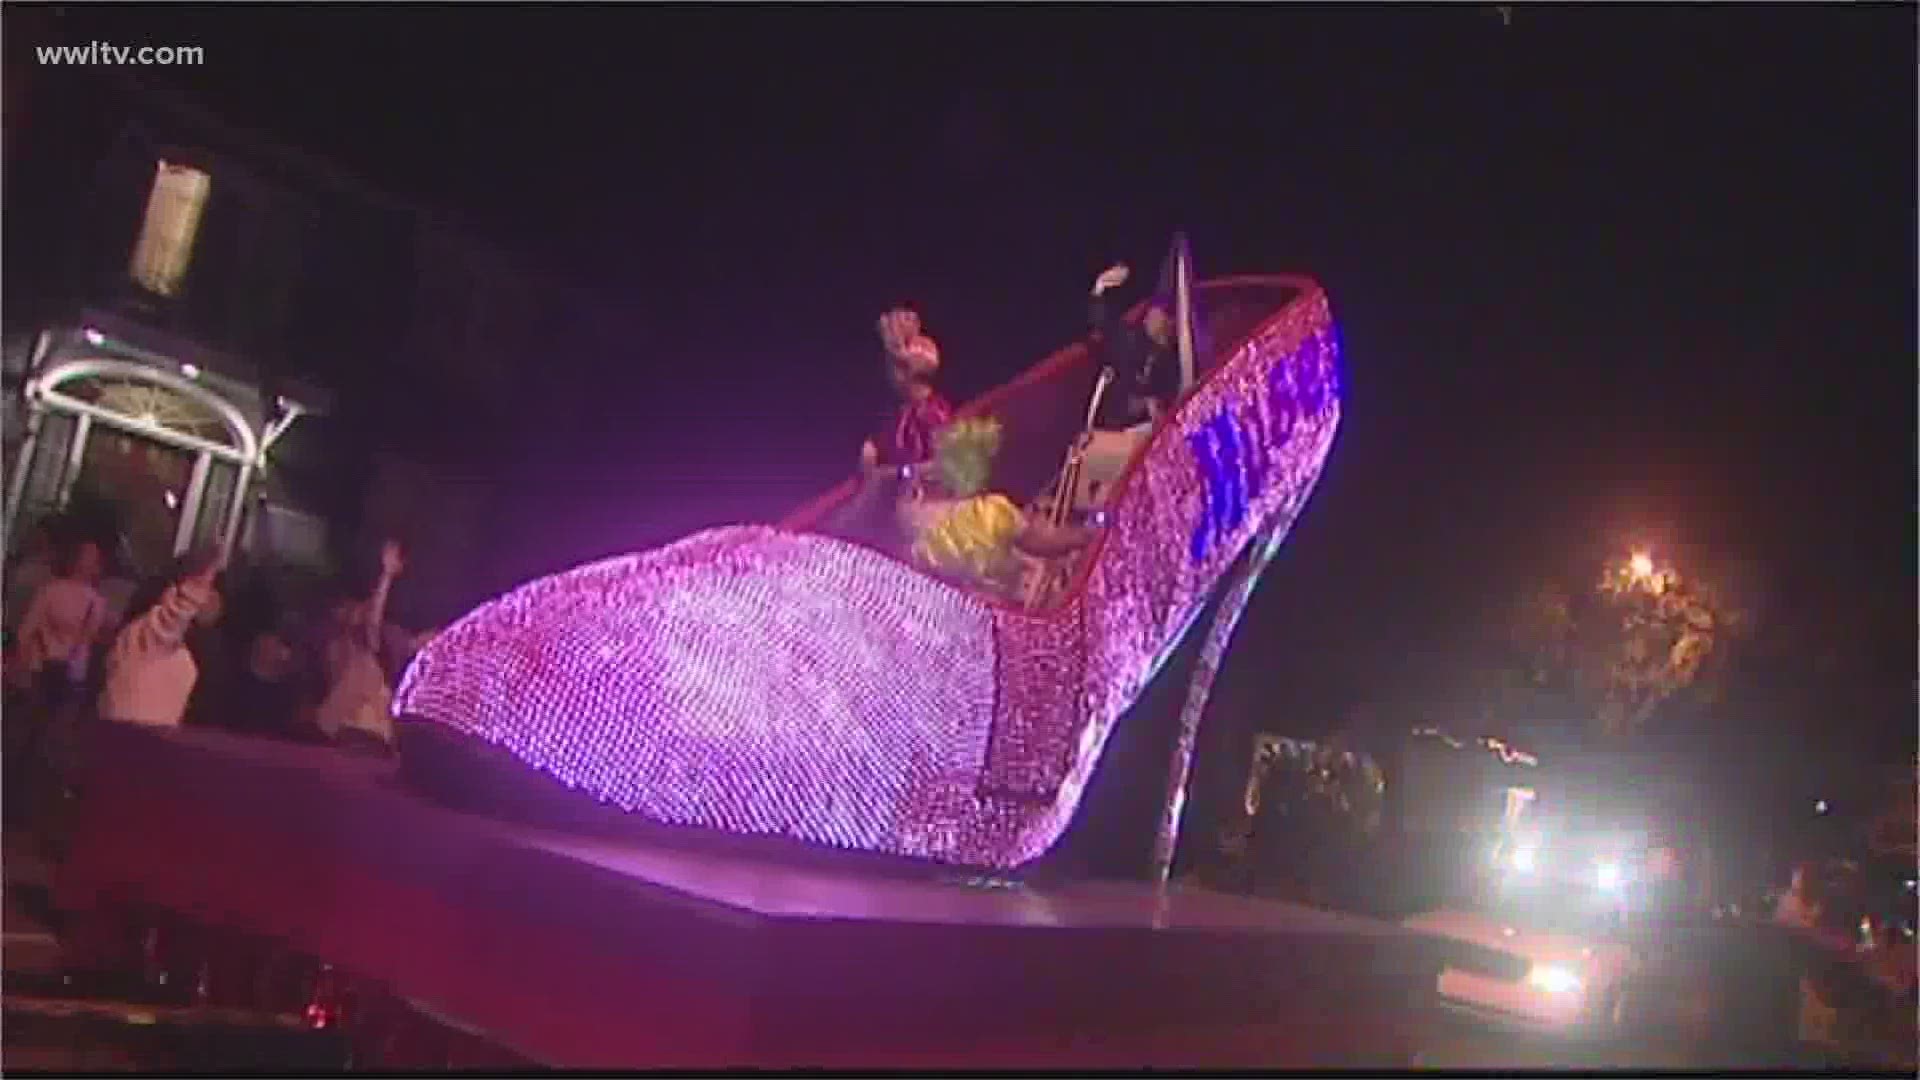 With COVID-19 cases rising, what are krewe leaders saying about the upcoming Carnival